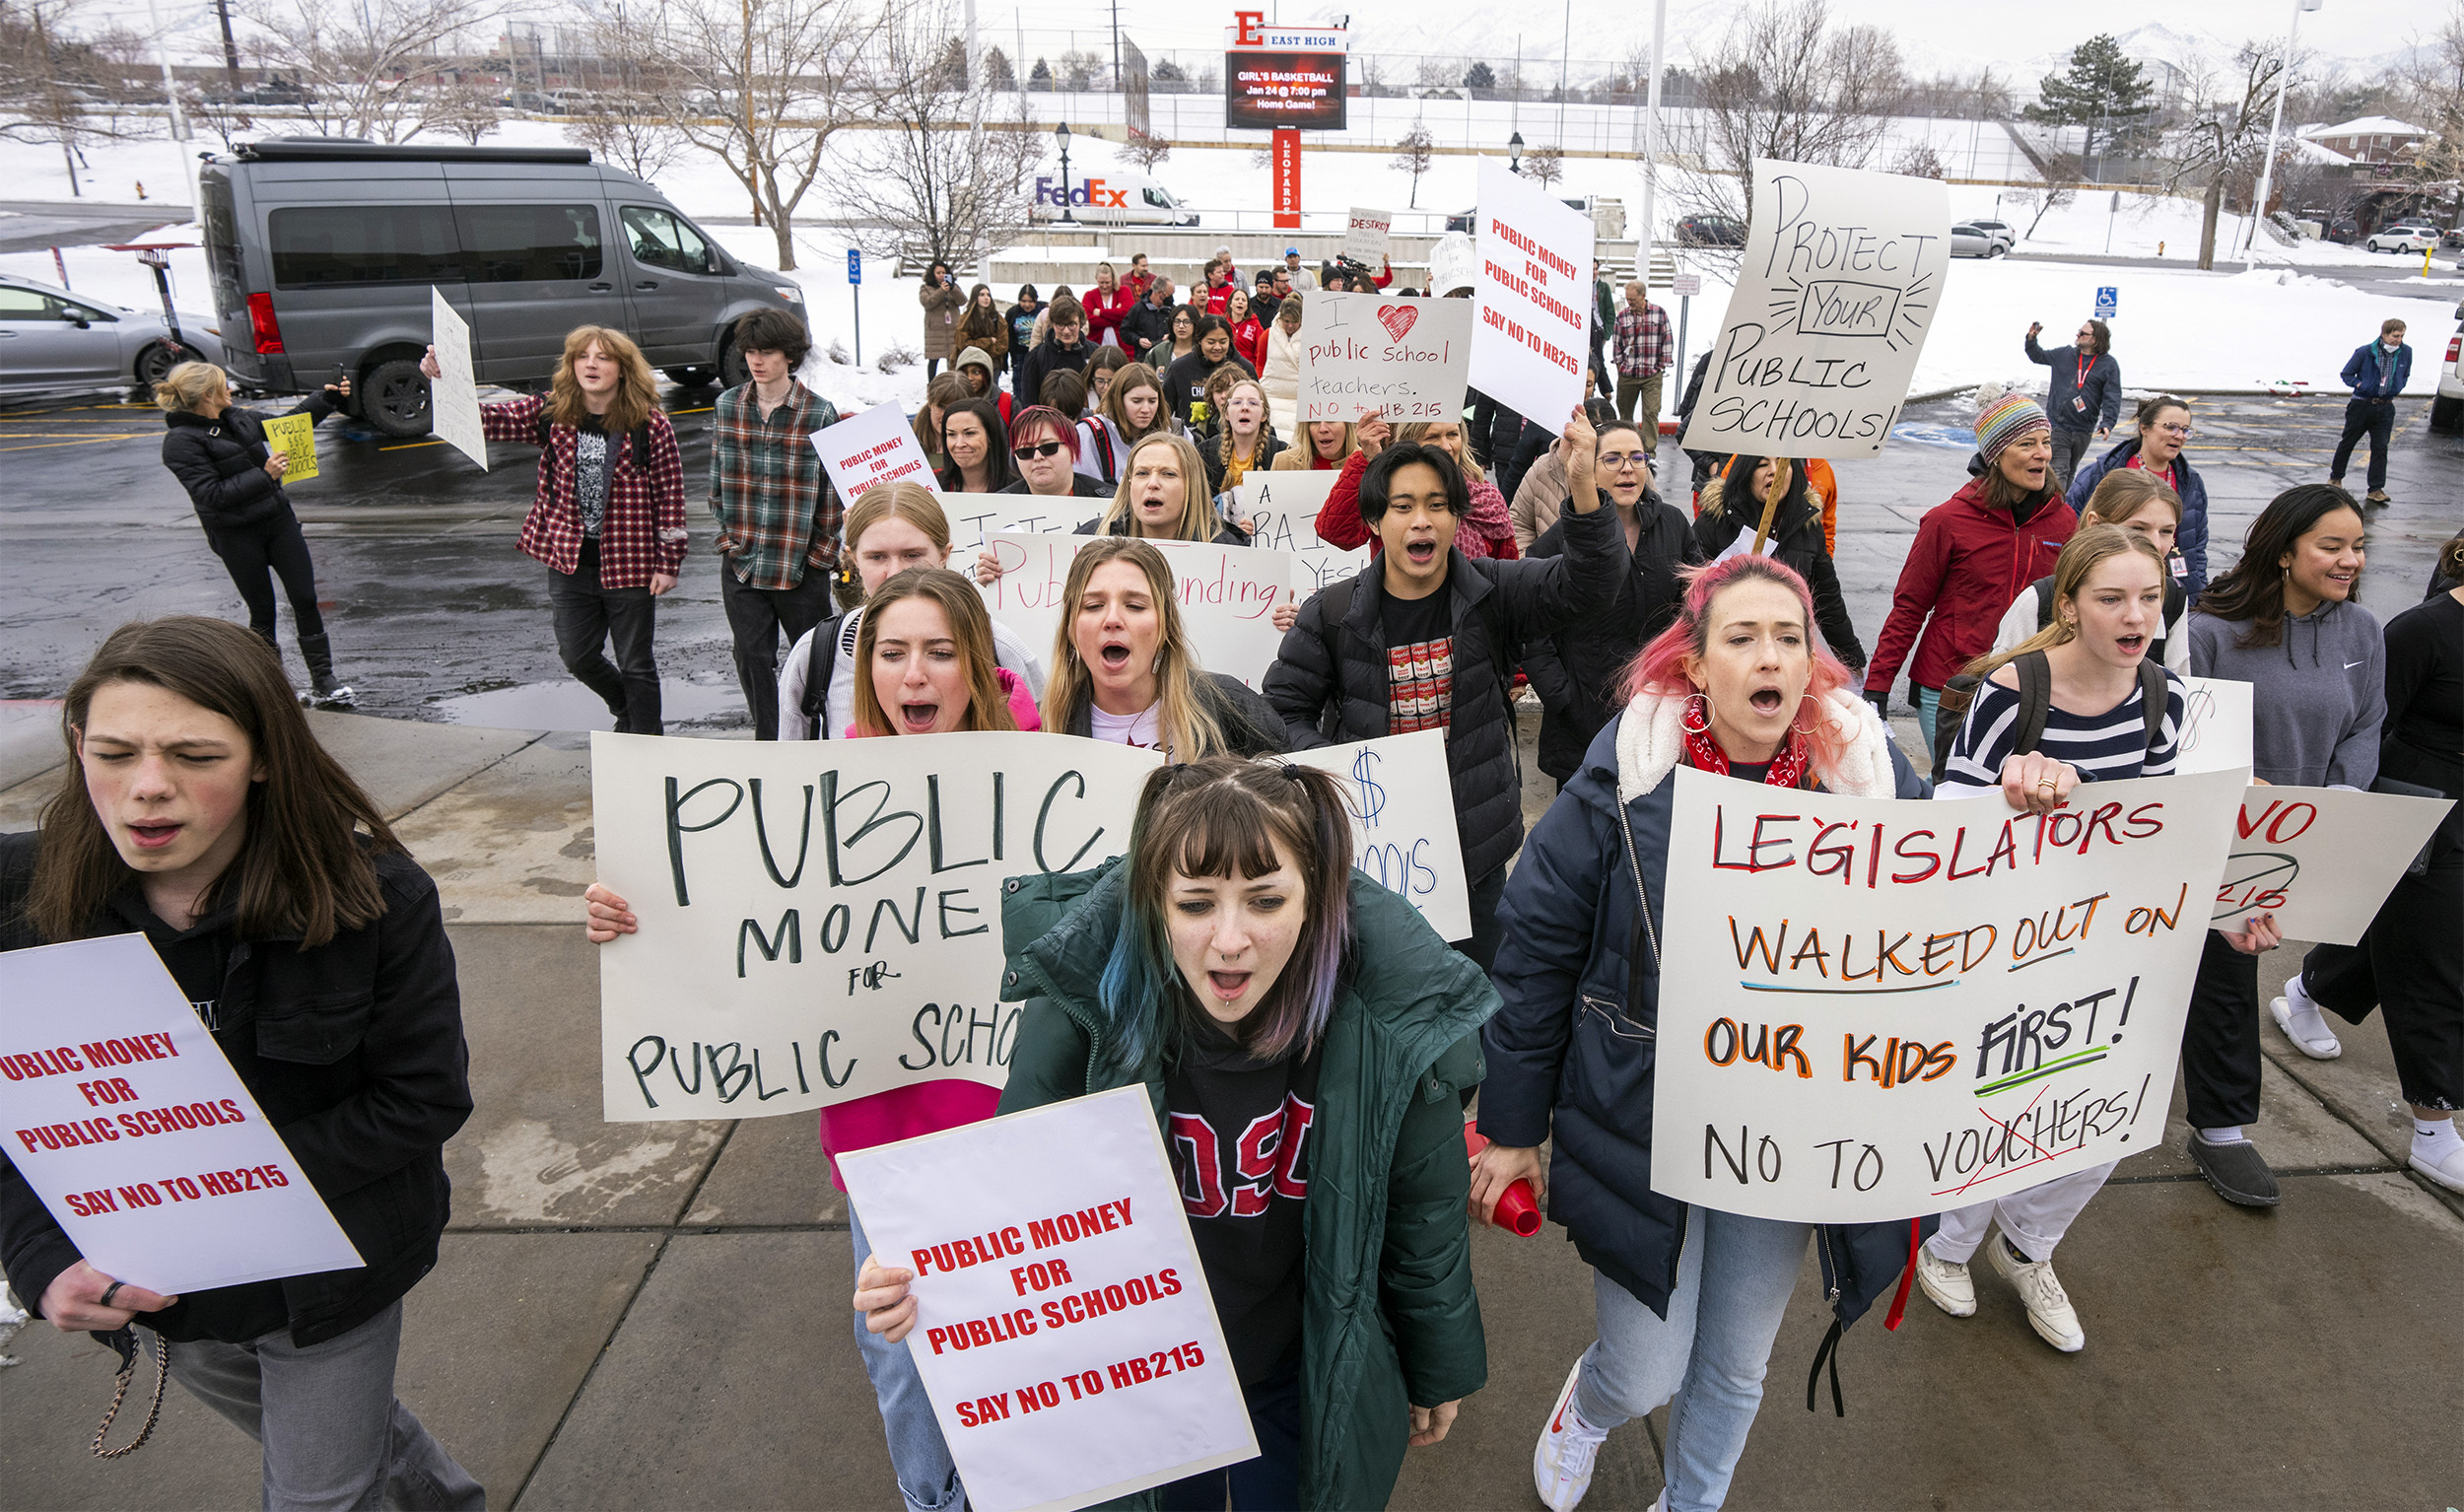 School Funding: Large group of young people in winter clothing stand on a sidewalk with sow in the background holding hand-made signs with language about school funding.